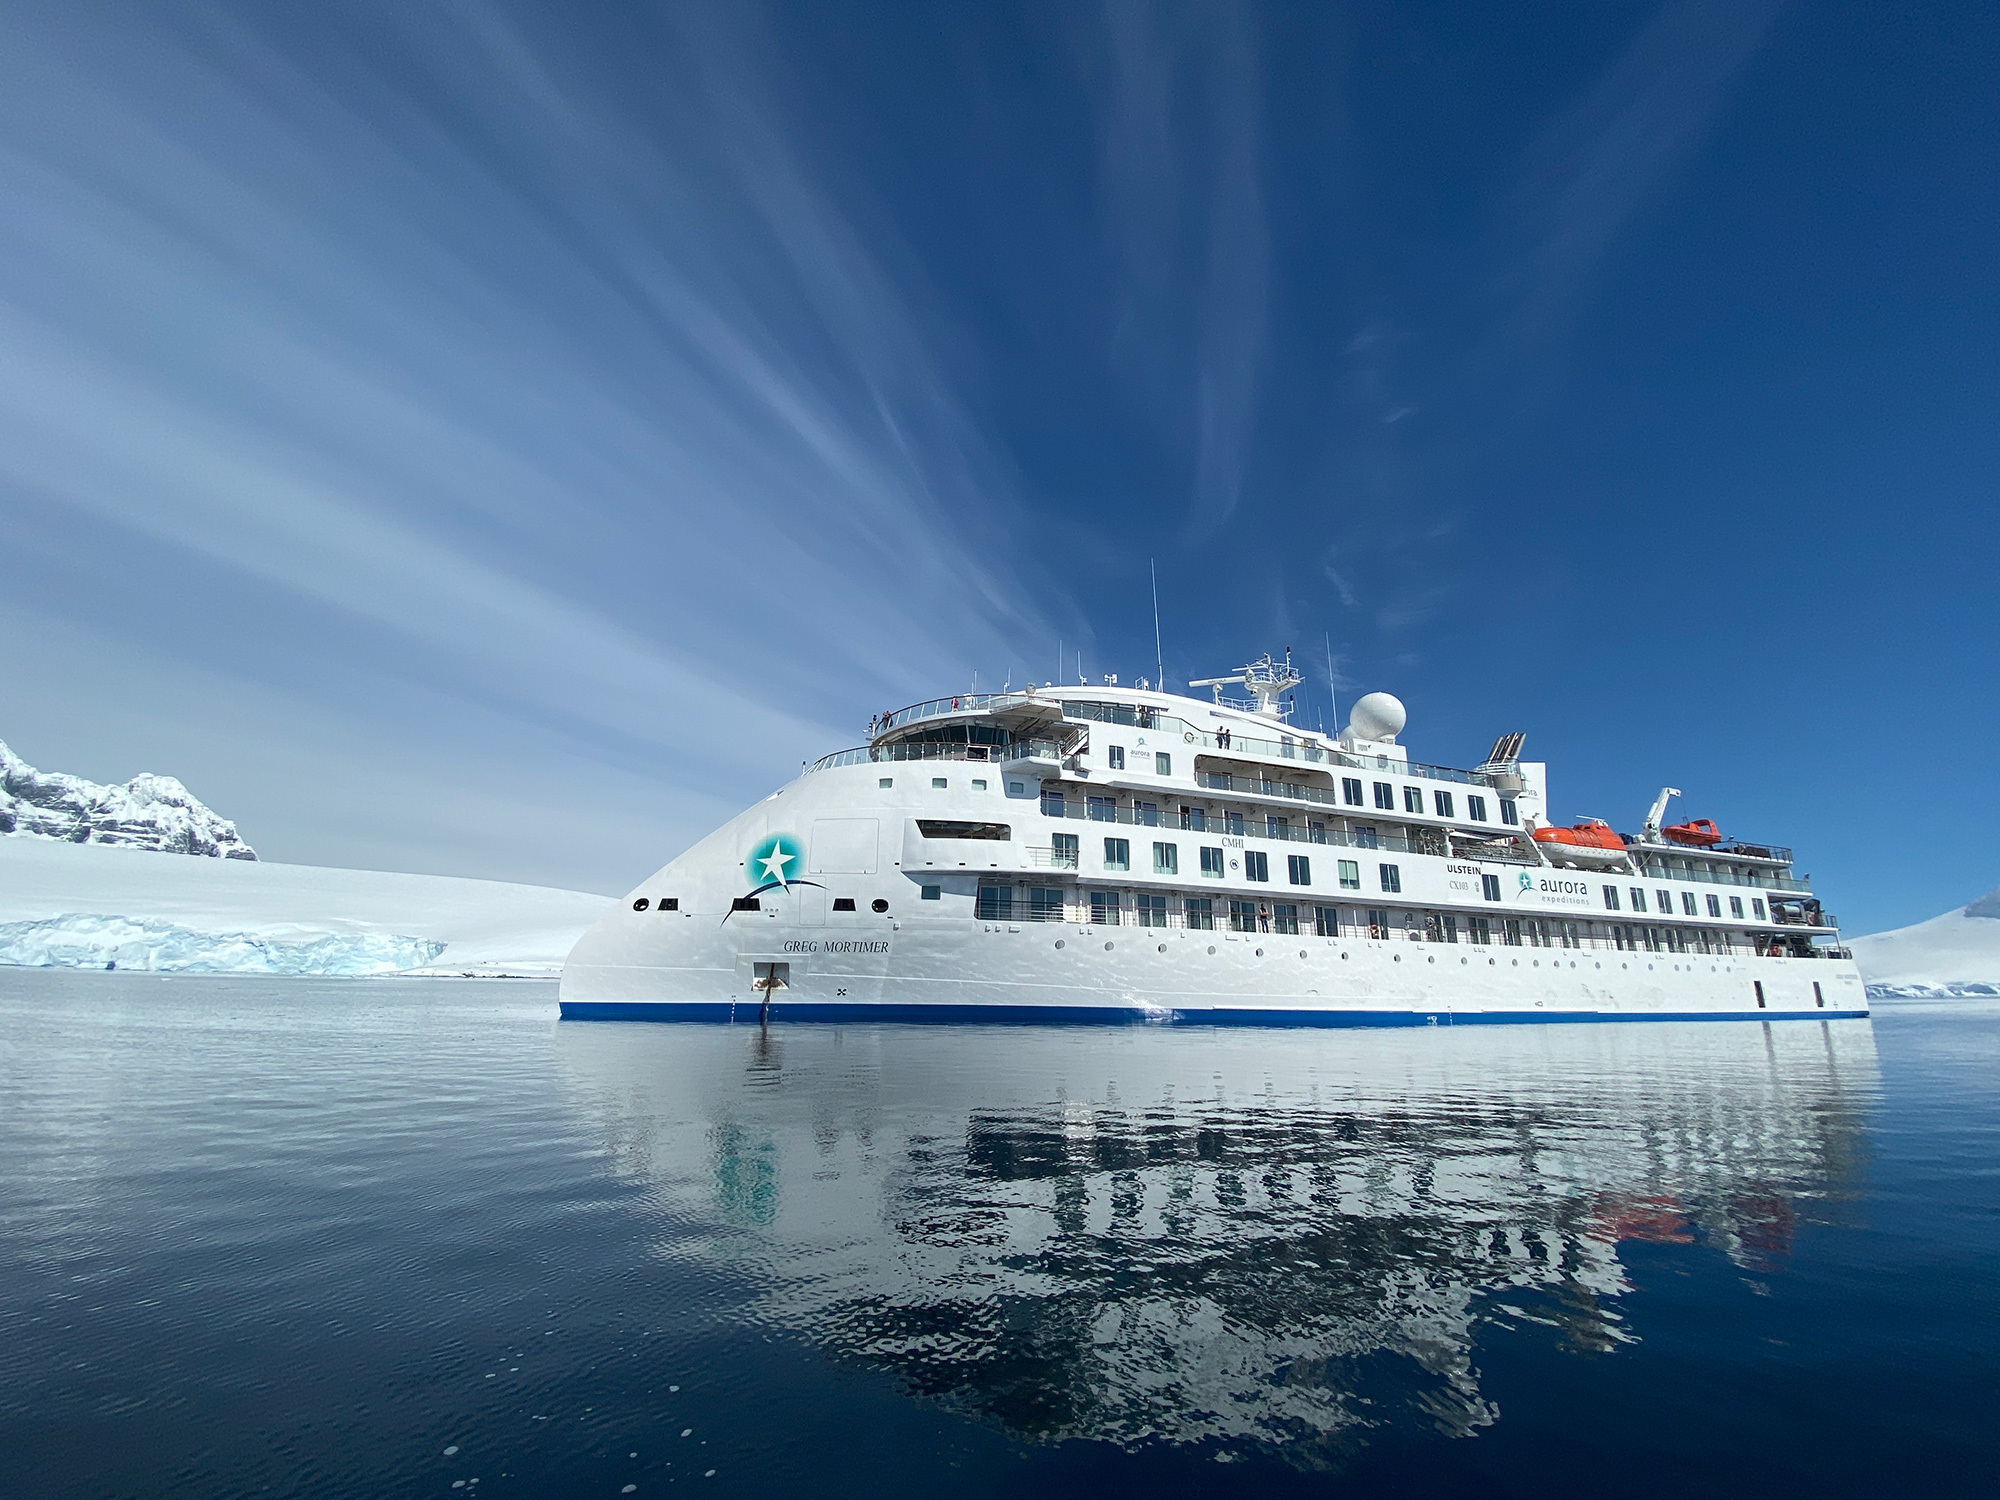 'Greg Mortimer' - X-BOW expedition cruise vessel, photo: Aurora Expeditions.